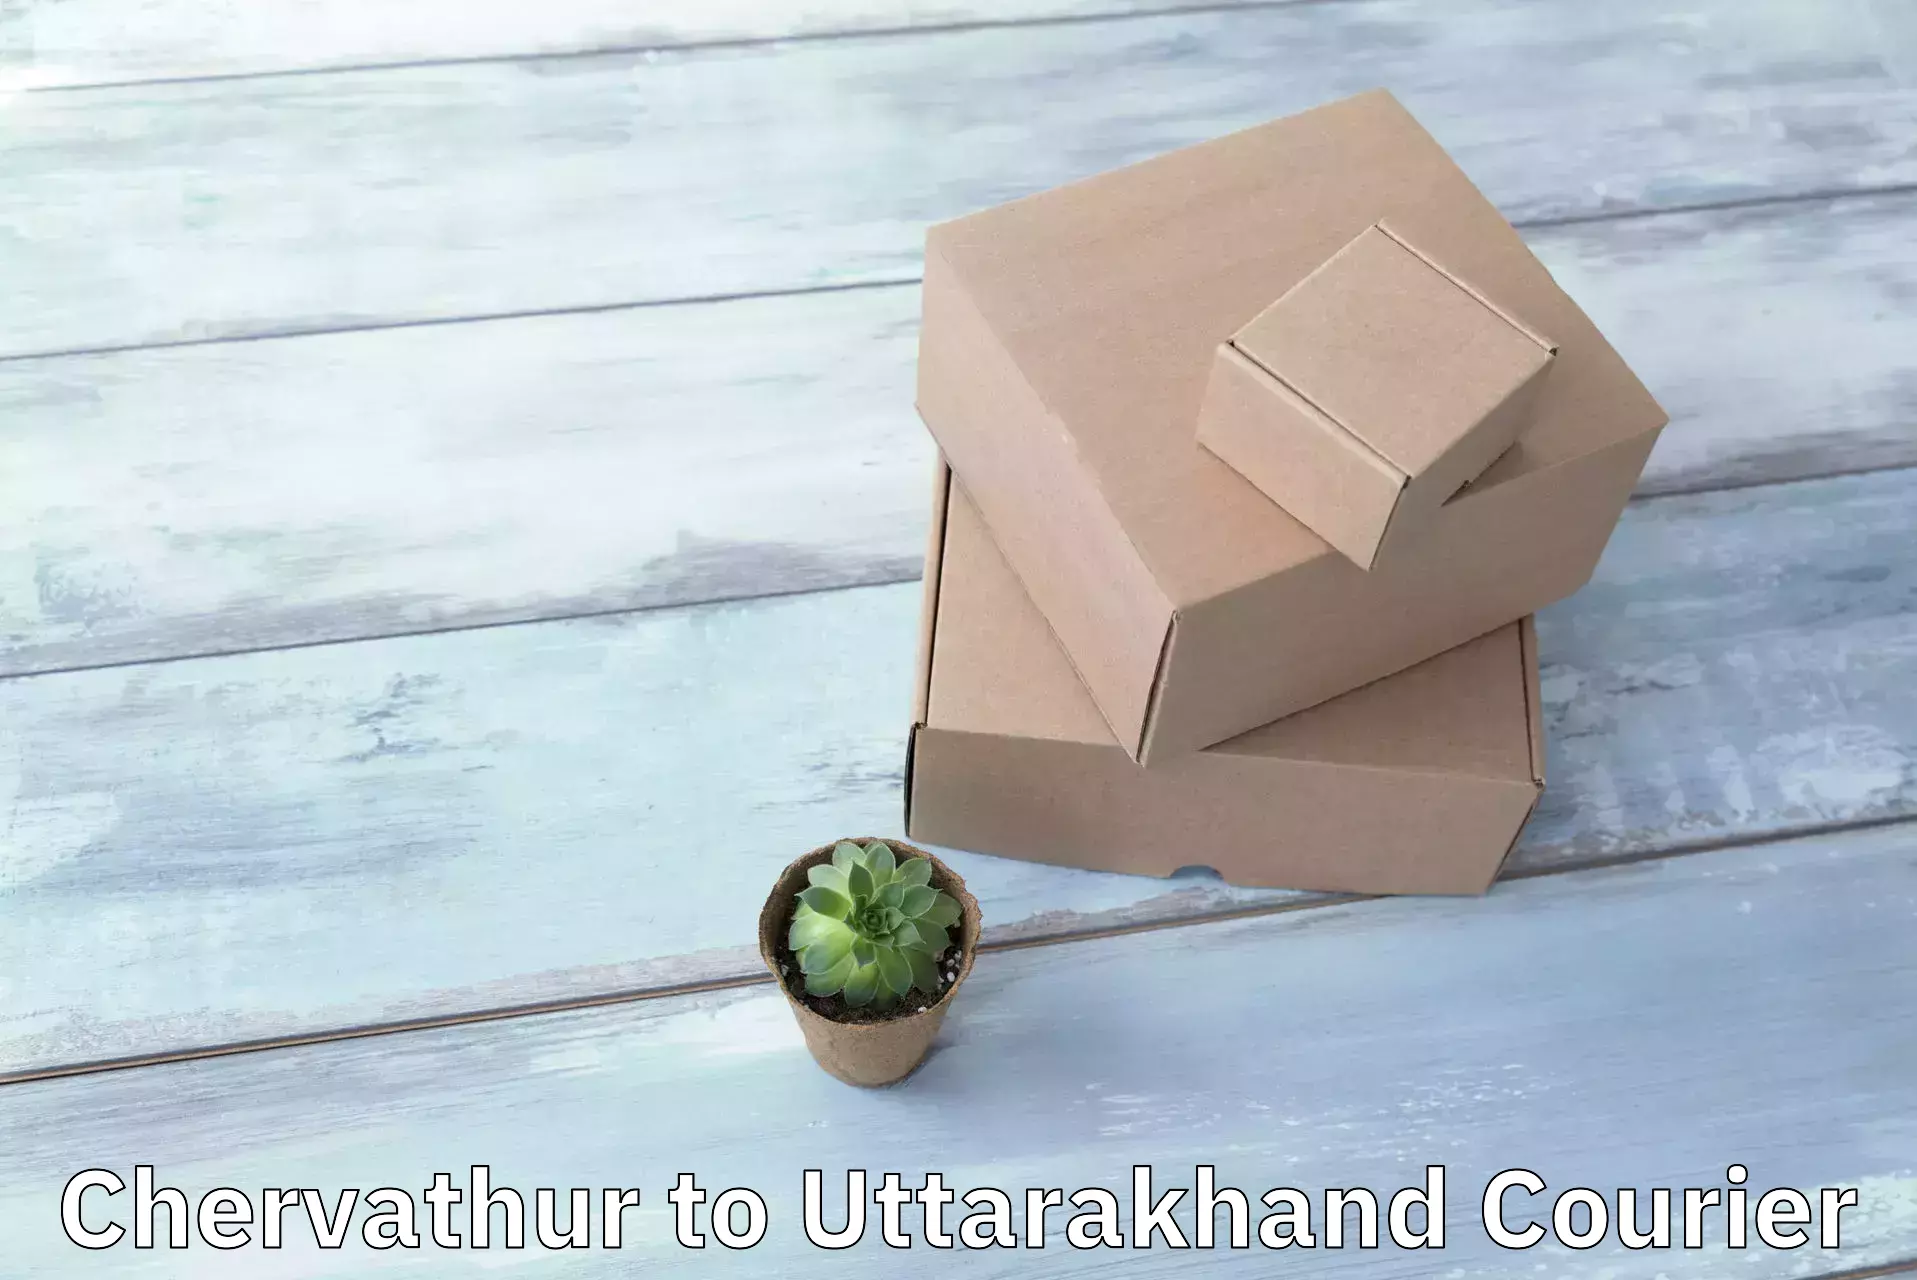 Professional delivery solutions Chervathur to Nainital